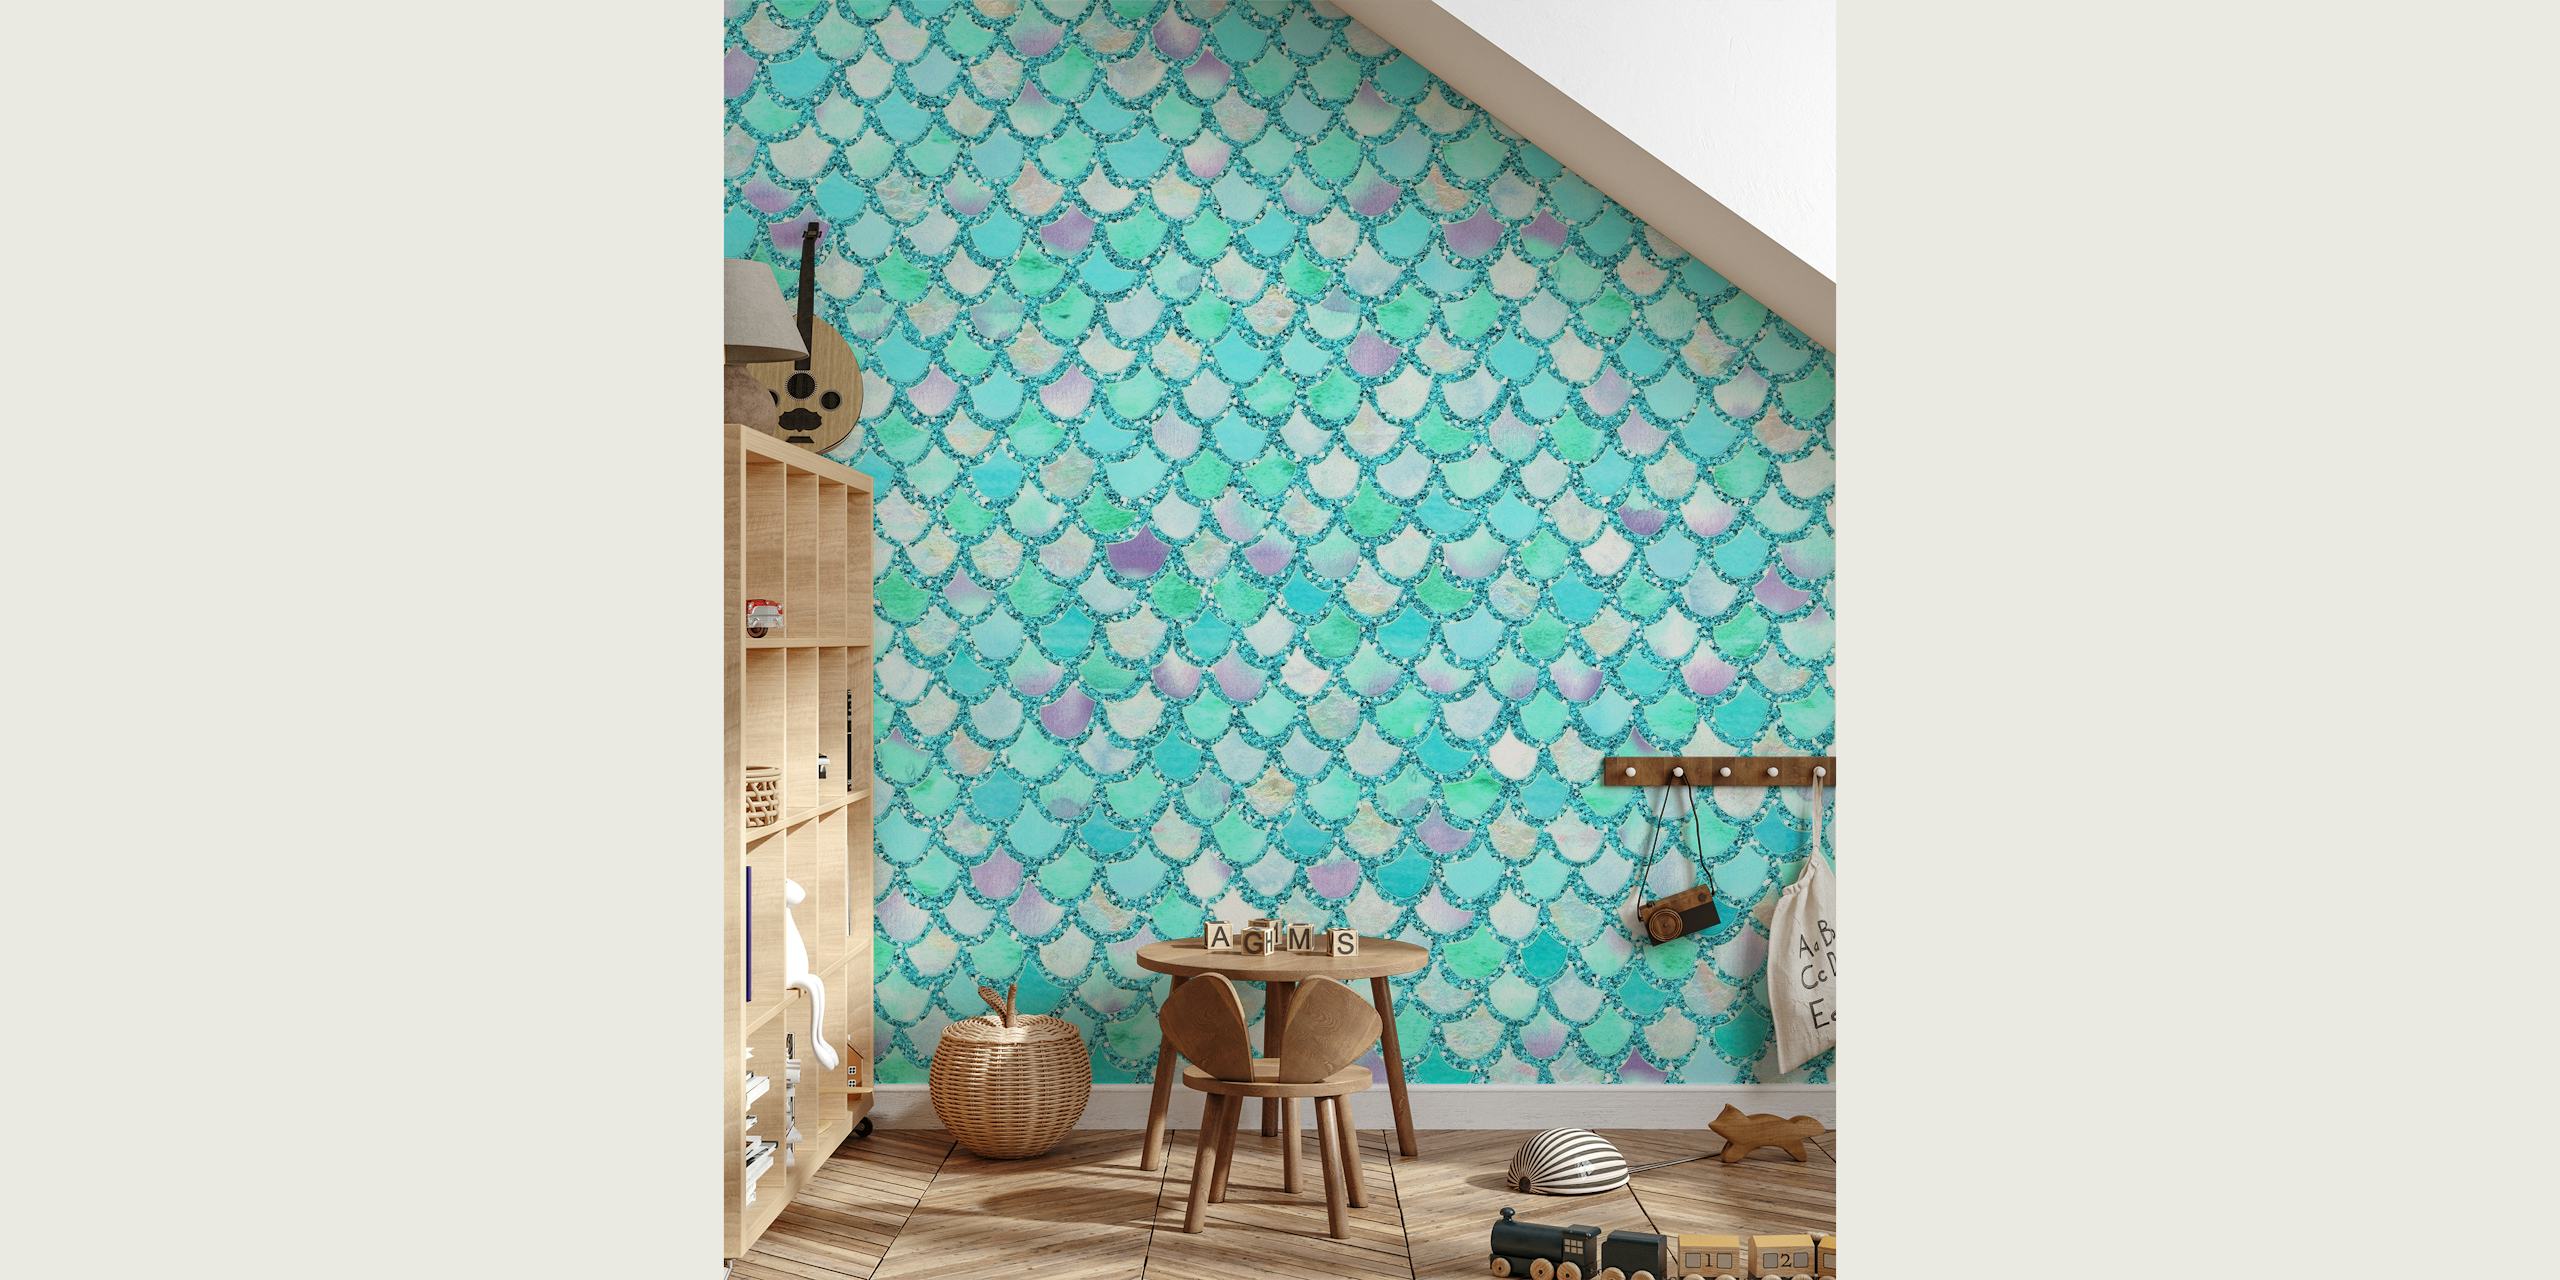 Teal Glitter Mermaid Scales wall mural with iridescent aquatic patterns